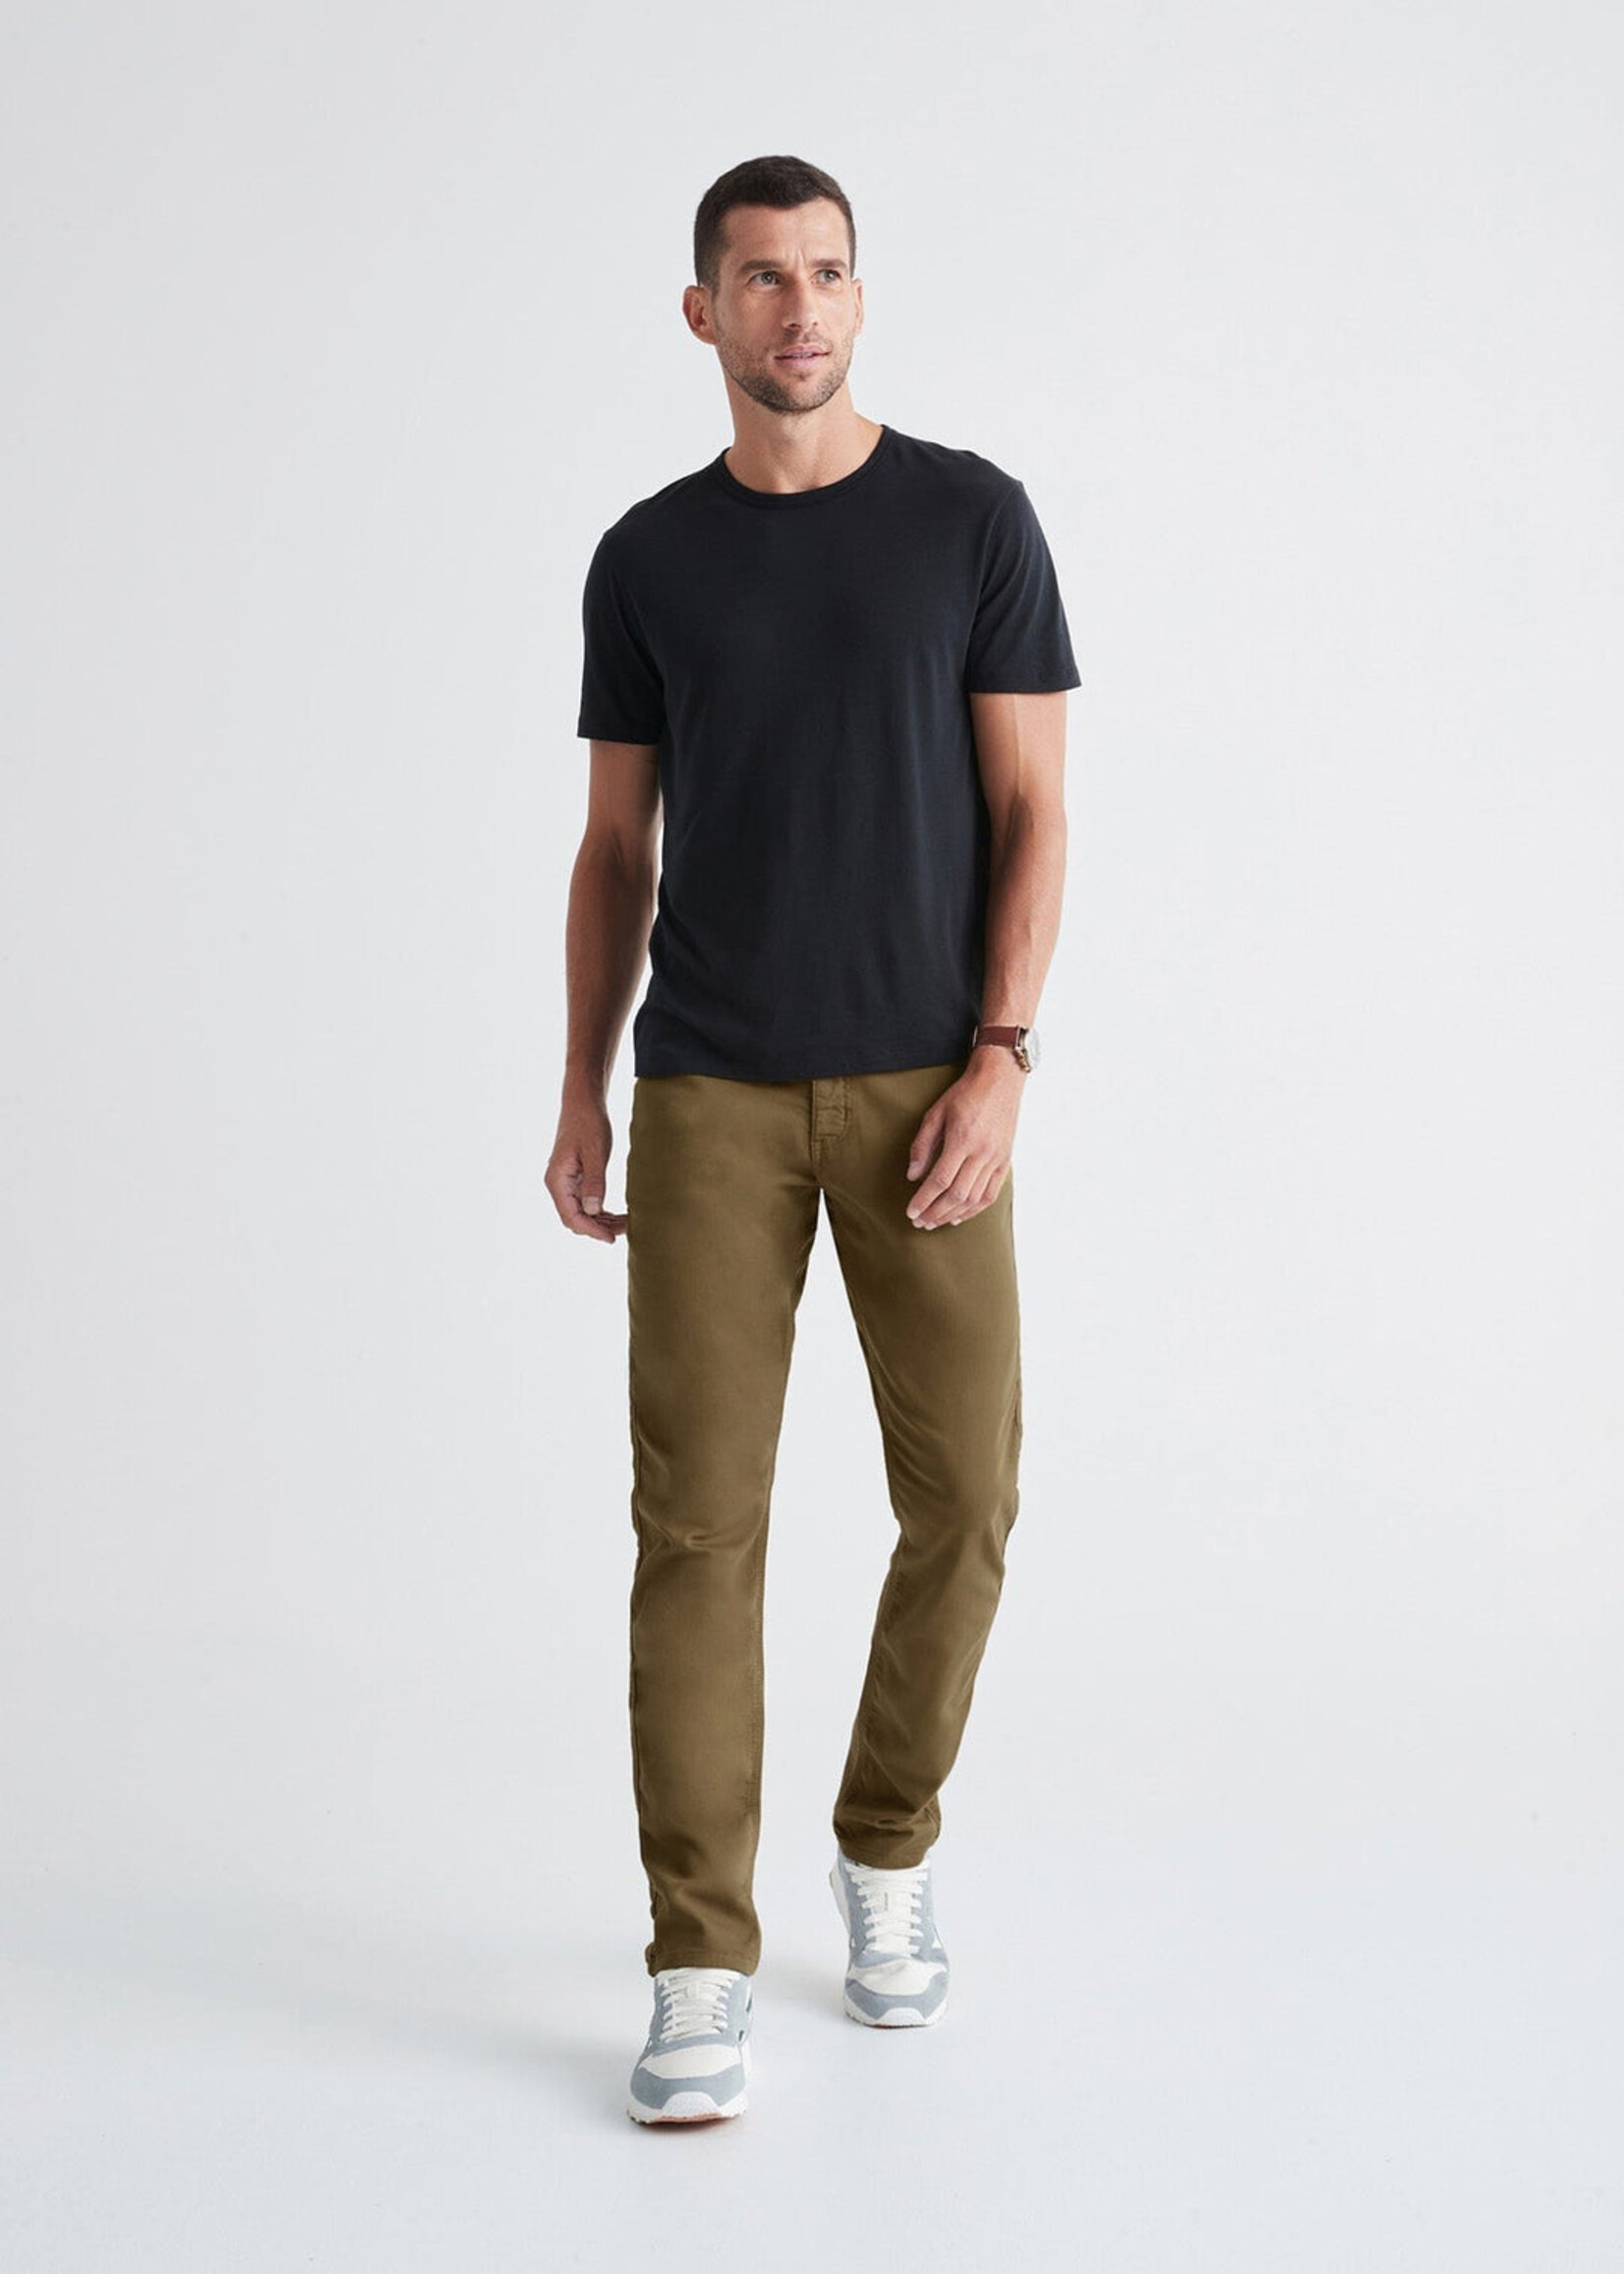 DUER No Sweat Pant Relaxed Taper - Tobacco